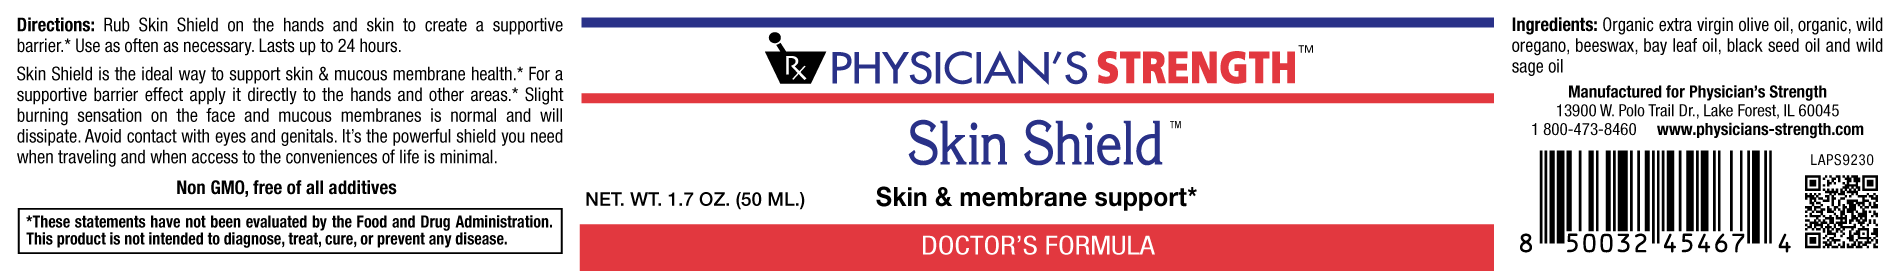 SkinShield (1.7 OZ)-Vitamins & Supplements-Physician's Strength-Pine Street Clinic